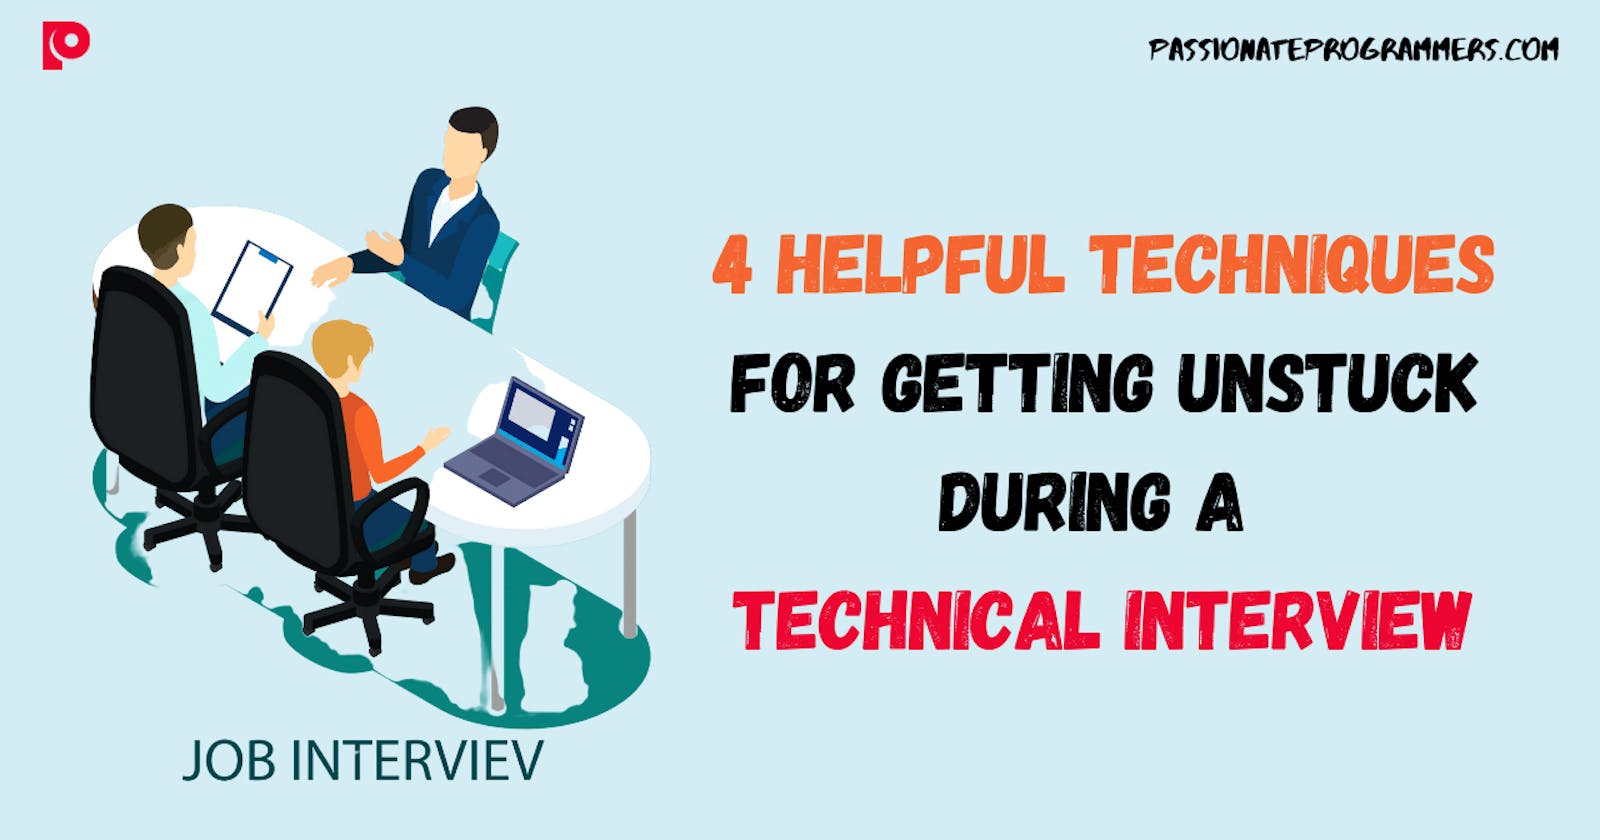 4 helpful techniques for getting unstuck during a Technical Interview